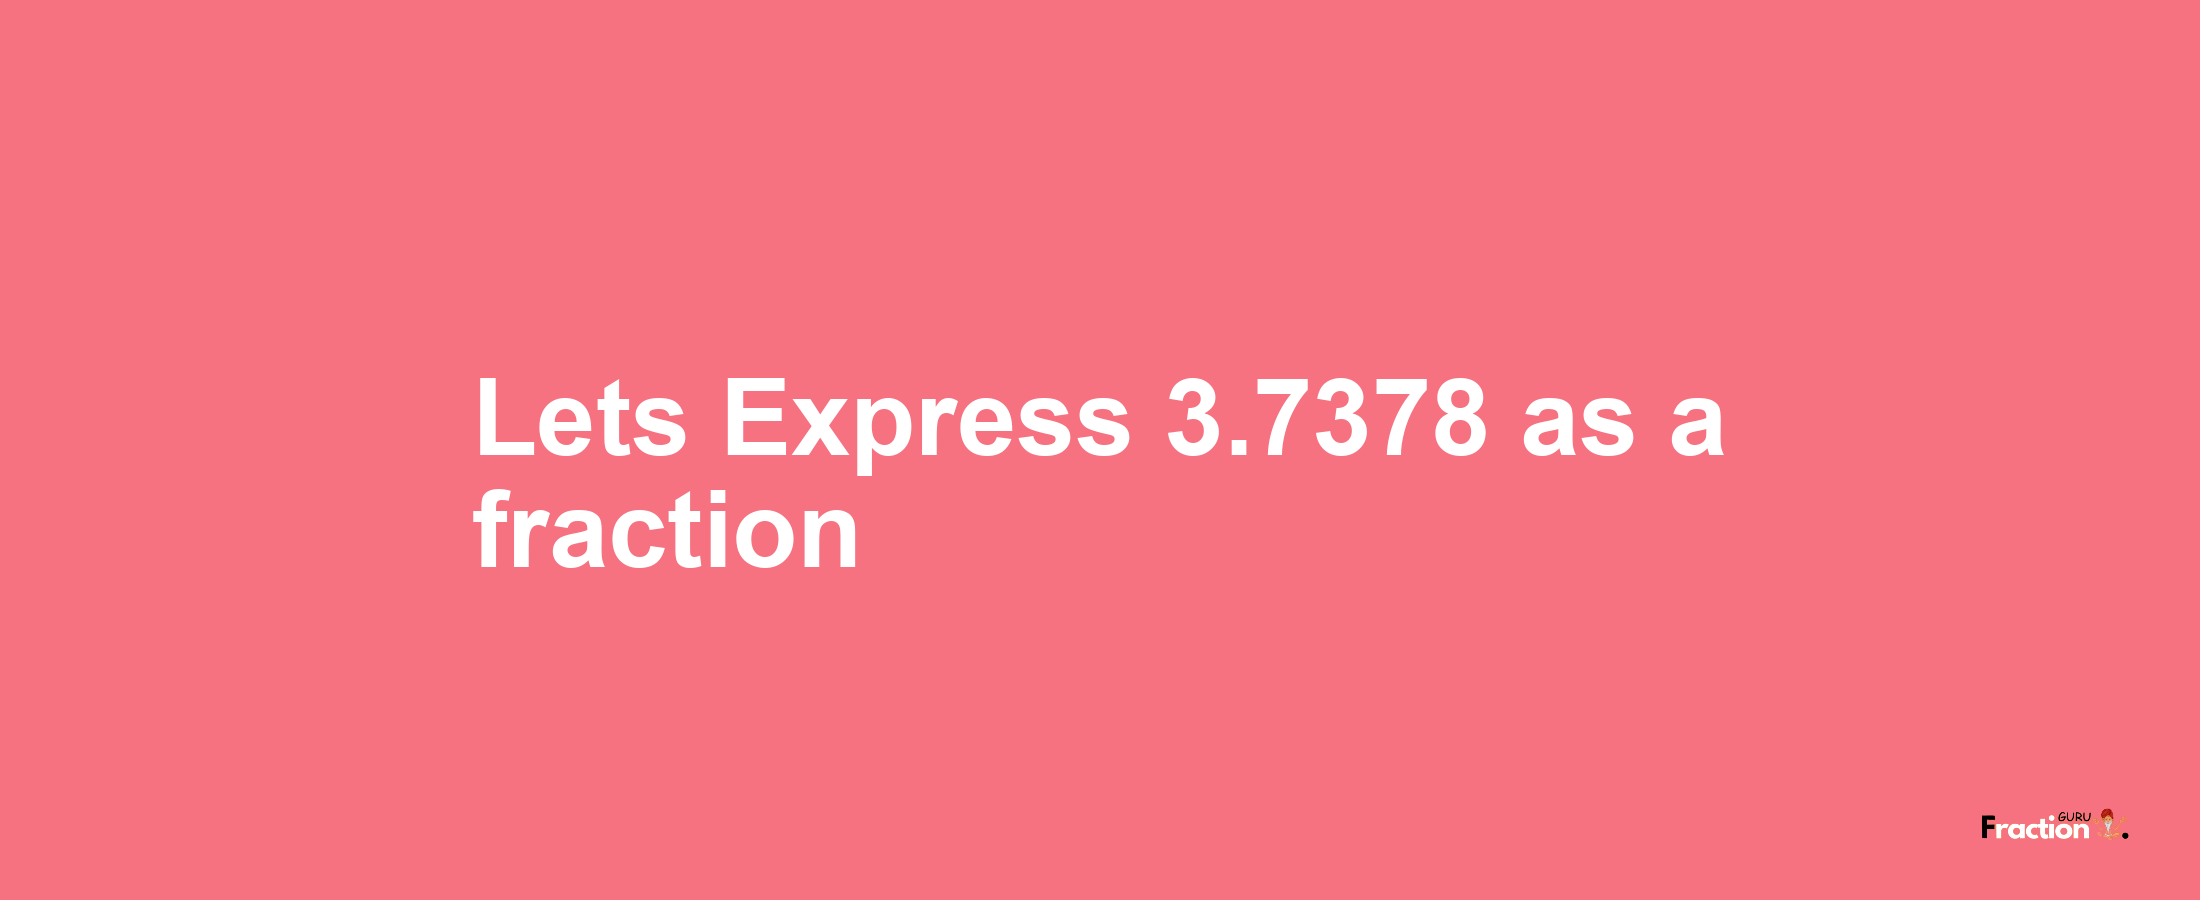 Lets Express 3.7378 as afraction